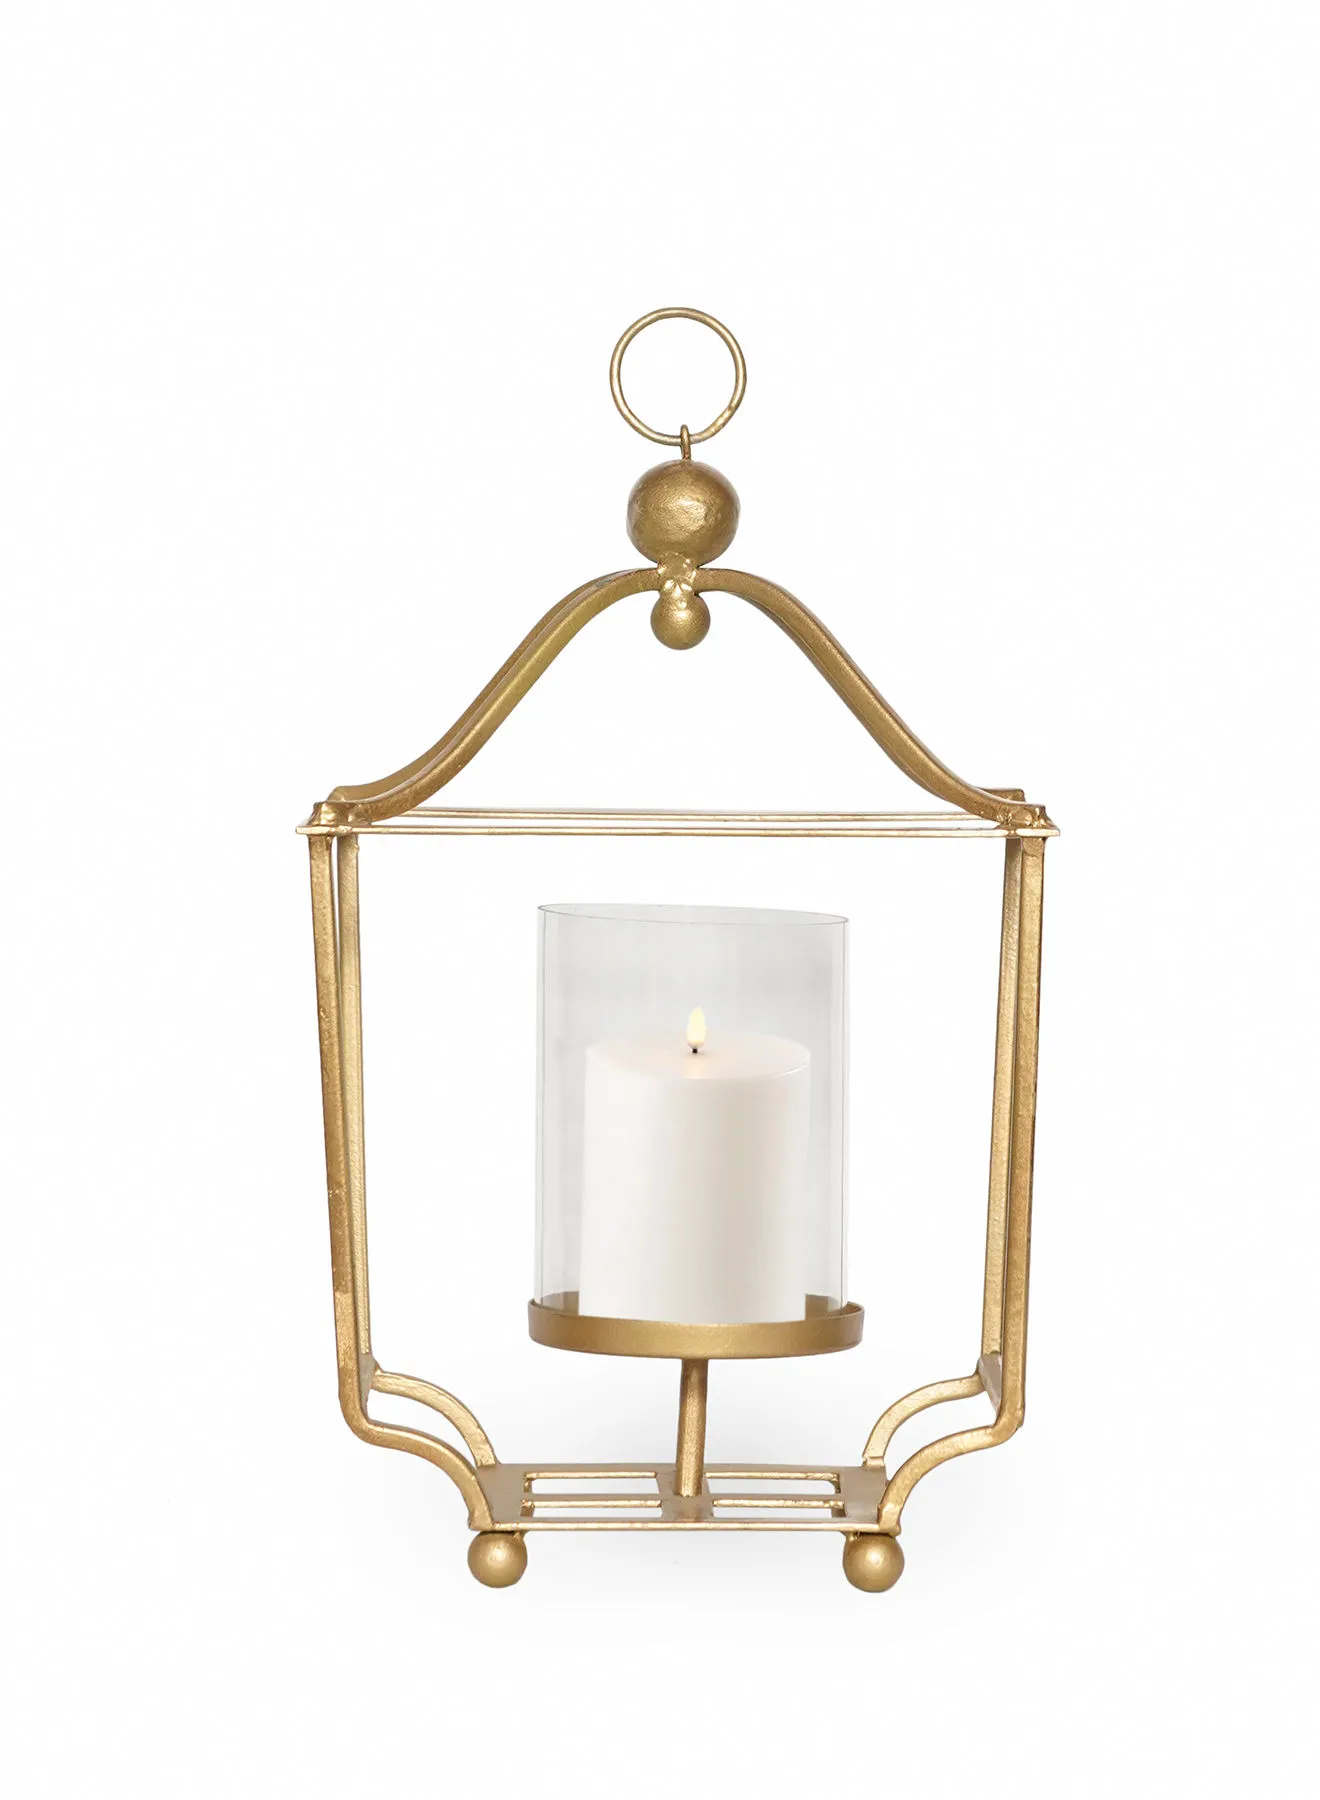 ebb & flow Modern Ideal Design Handmade Lantern  Unique Luxury Quality Scents For The Perfect Stylish Home Gold 10X9X27centimeter